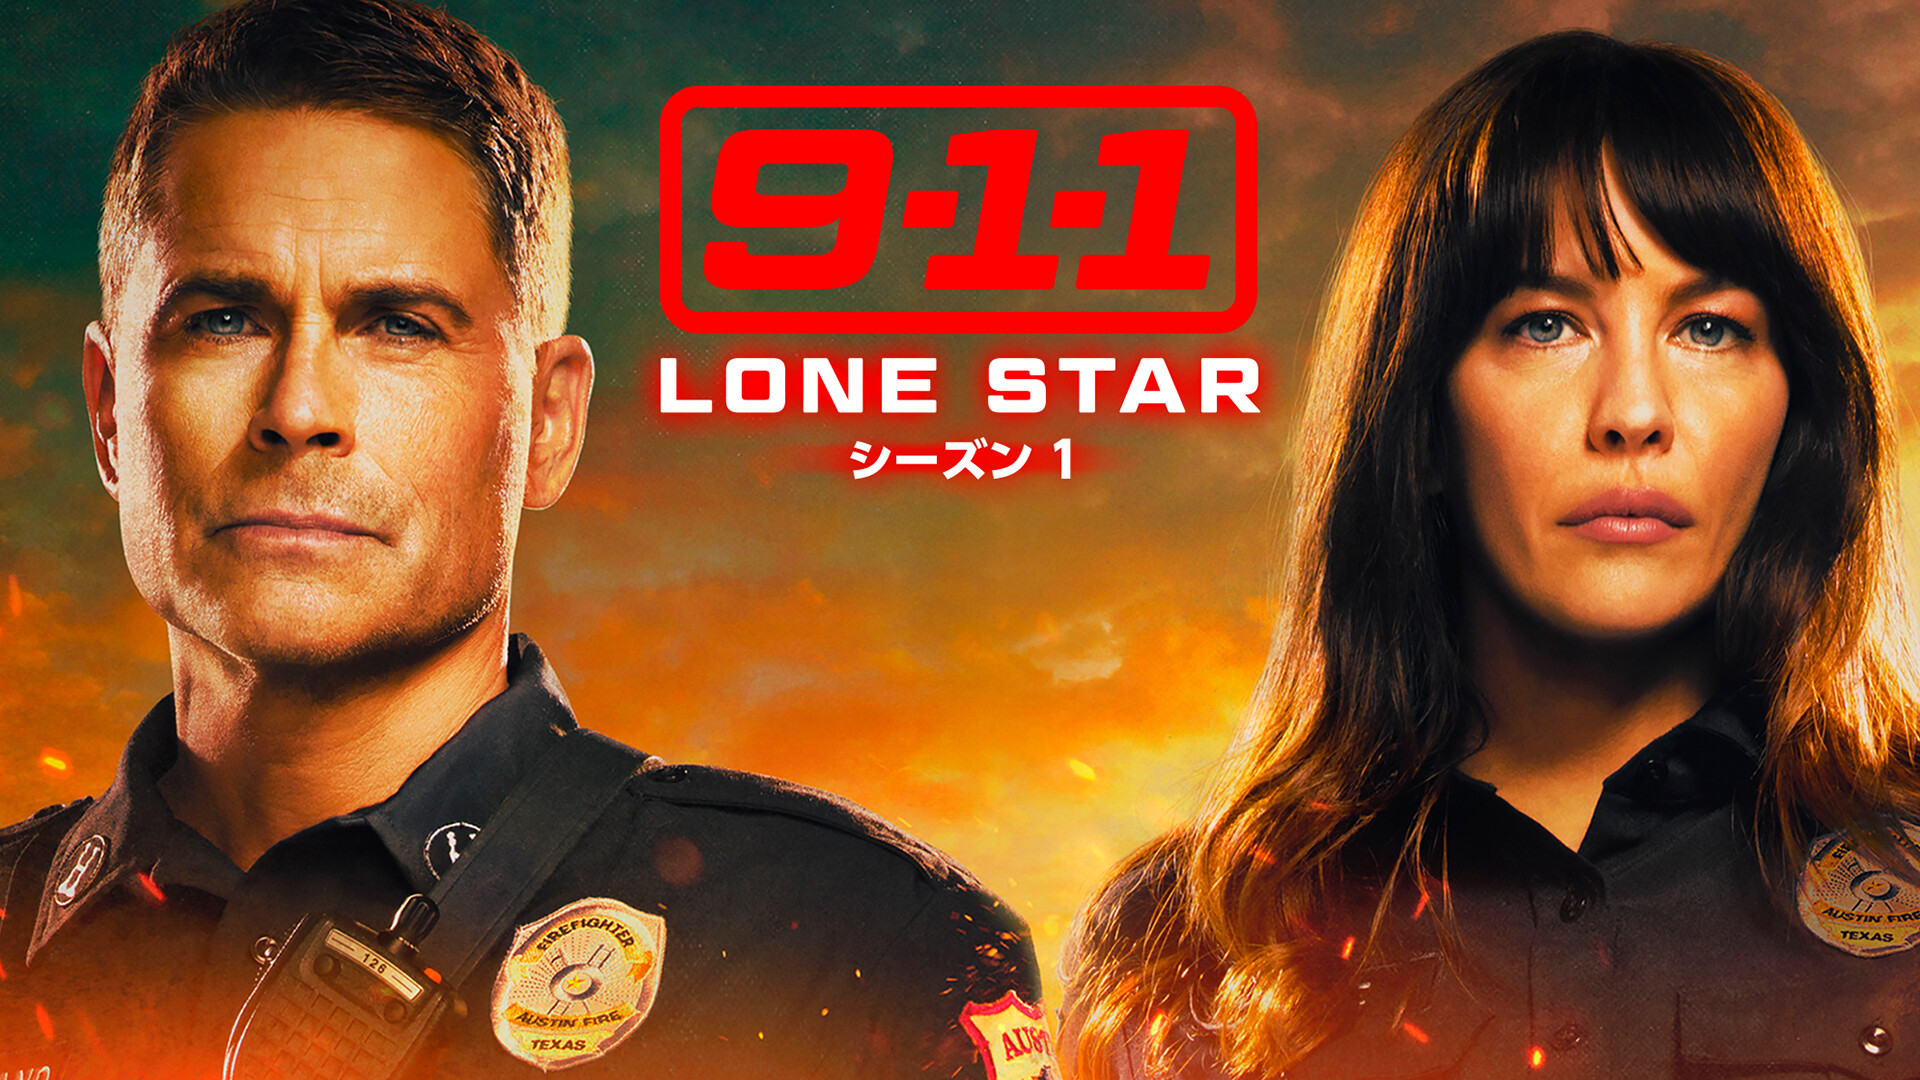 9-1-1: Lone Star (TV Series): Show Poster, Chinese Version, Firefighter And Paramedic Captains. 1920x1080 Full HD Background.